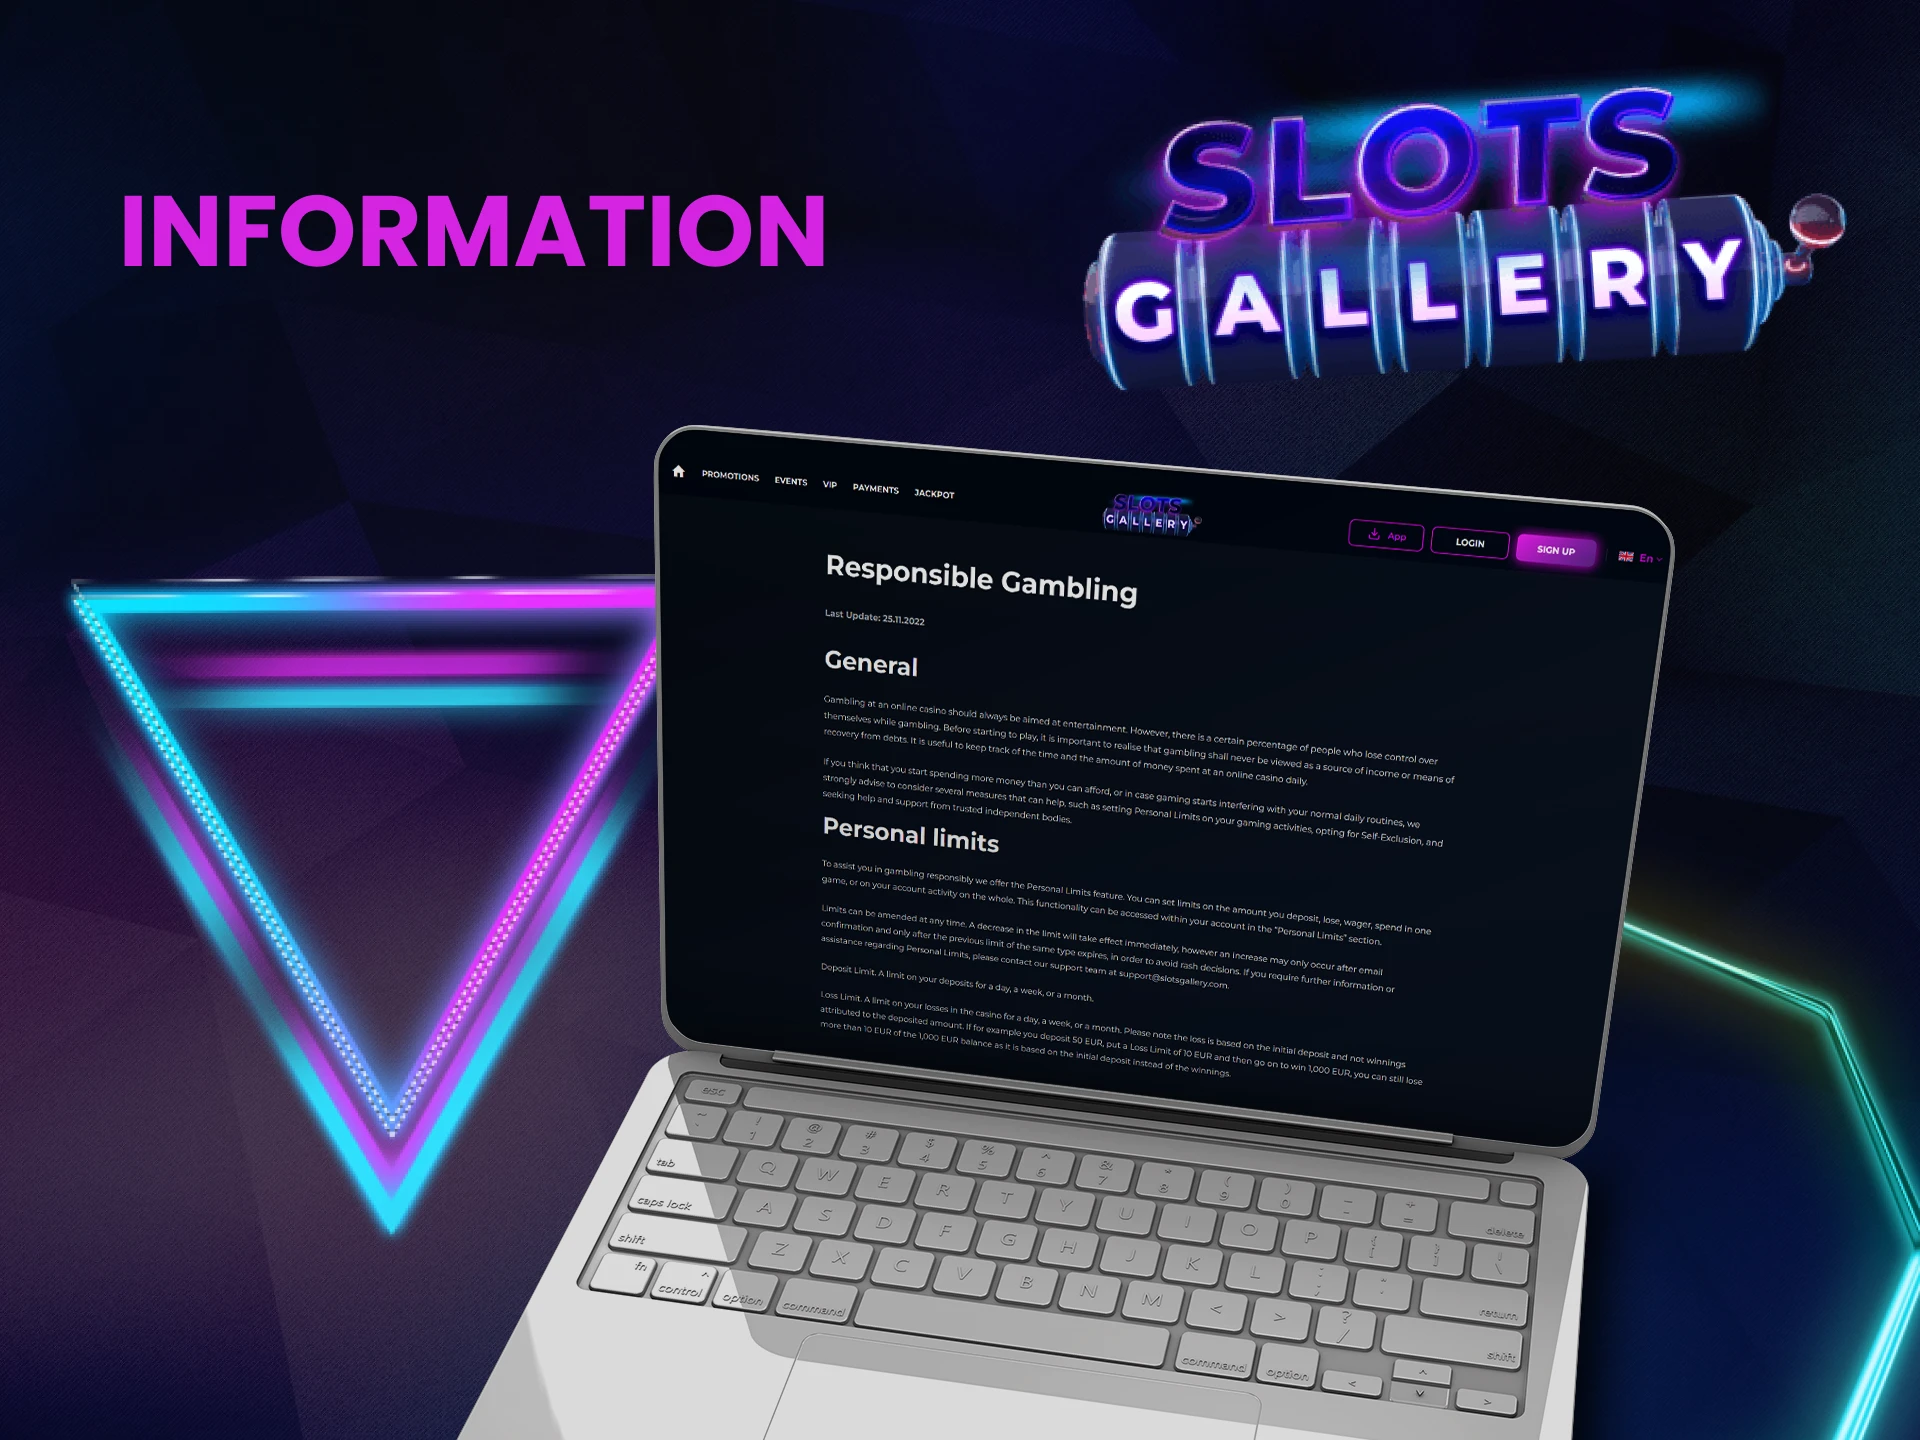 Explore information about responsible gambling on the Slots Gallery website.